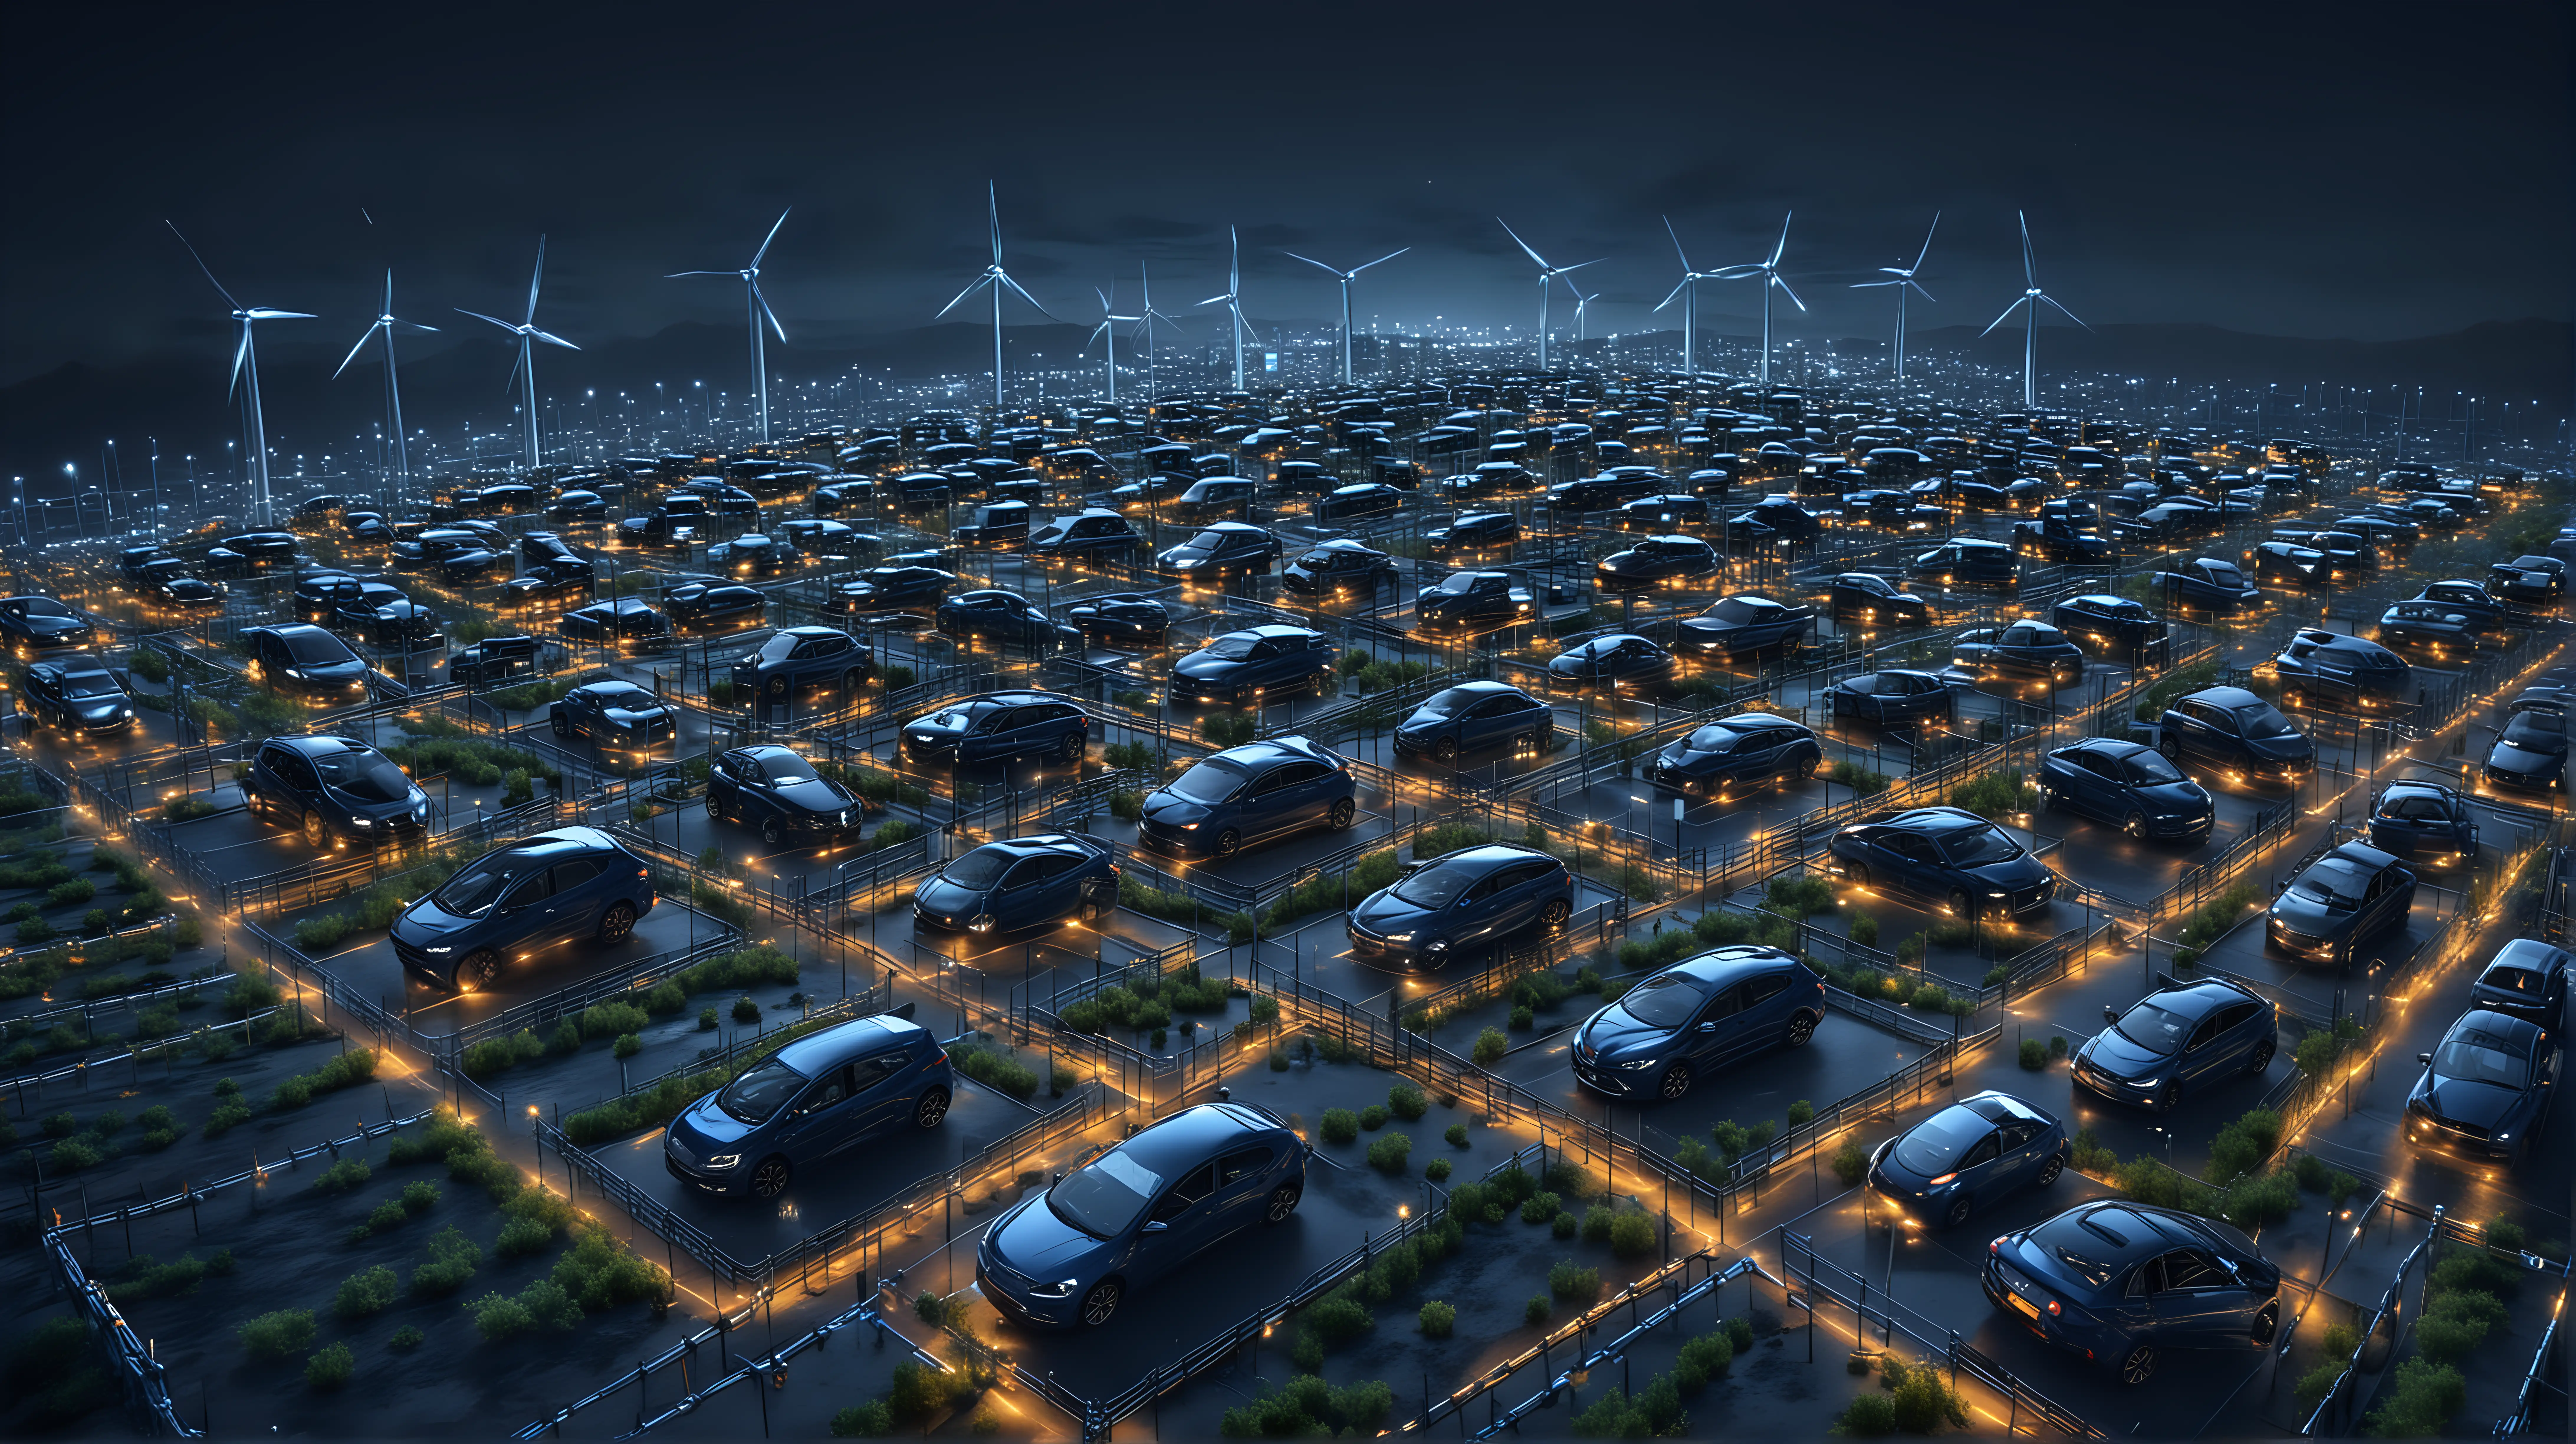 Sustainable Energy Grid with Connected Industrial Vehicles at Night